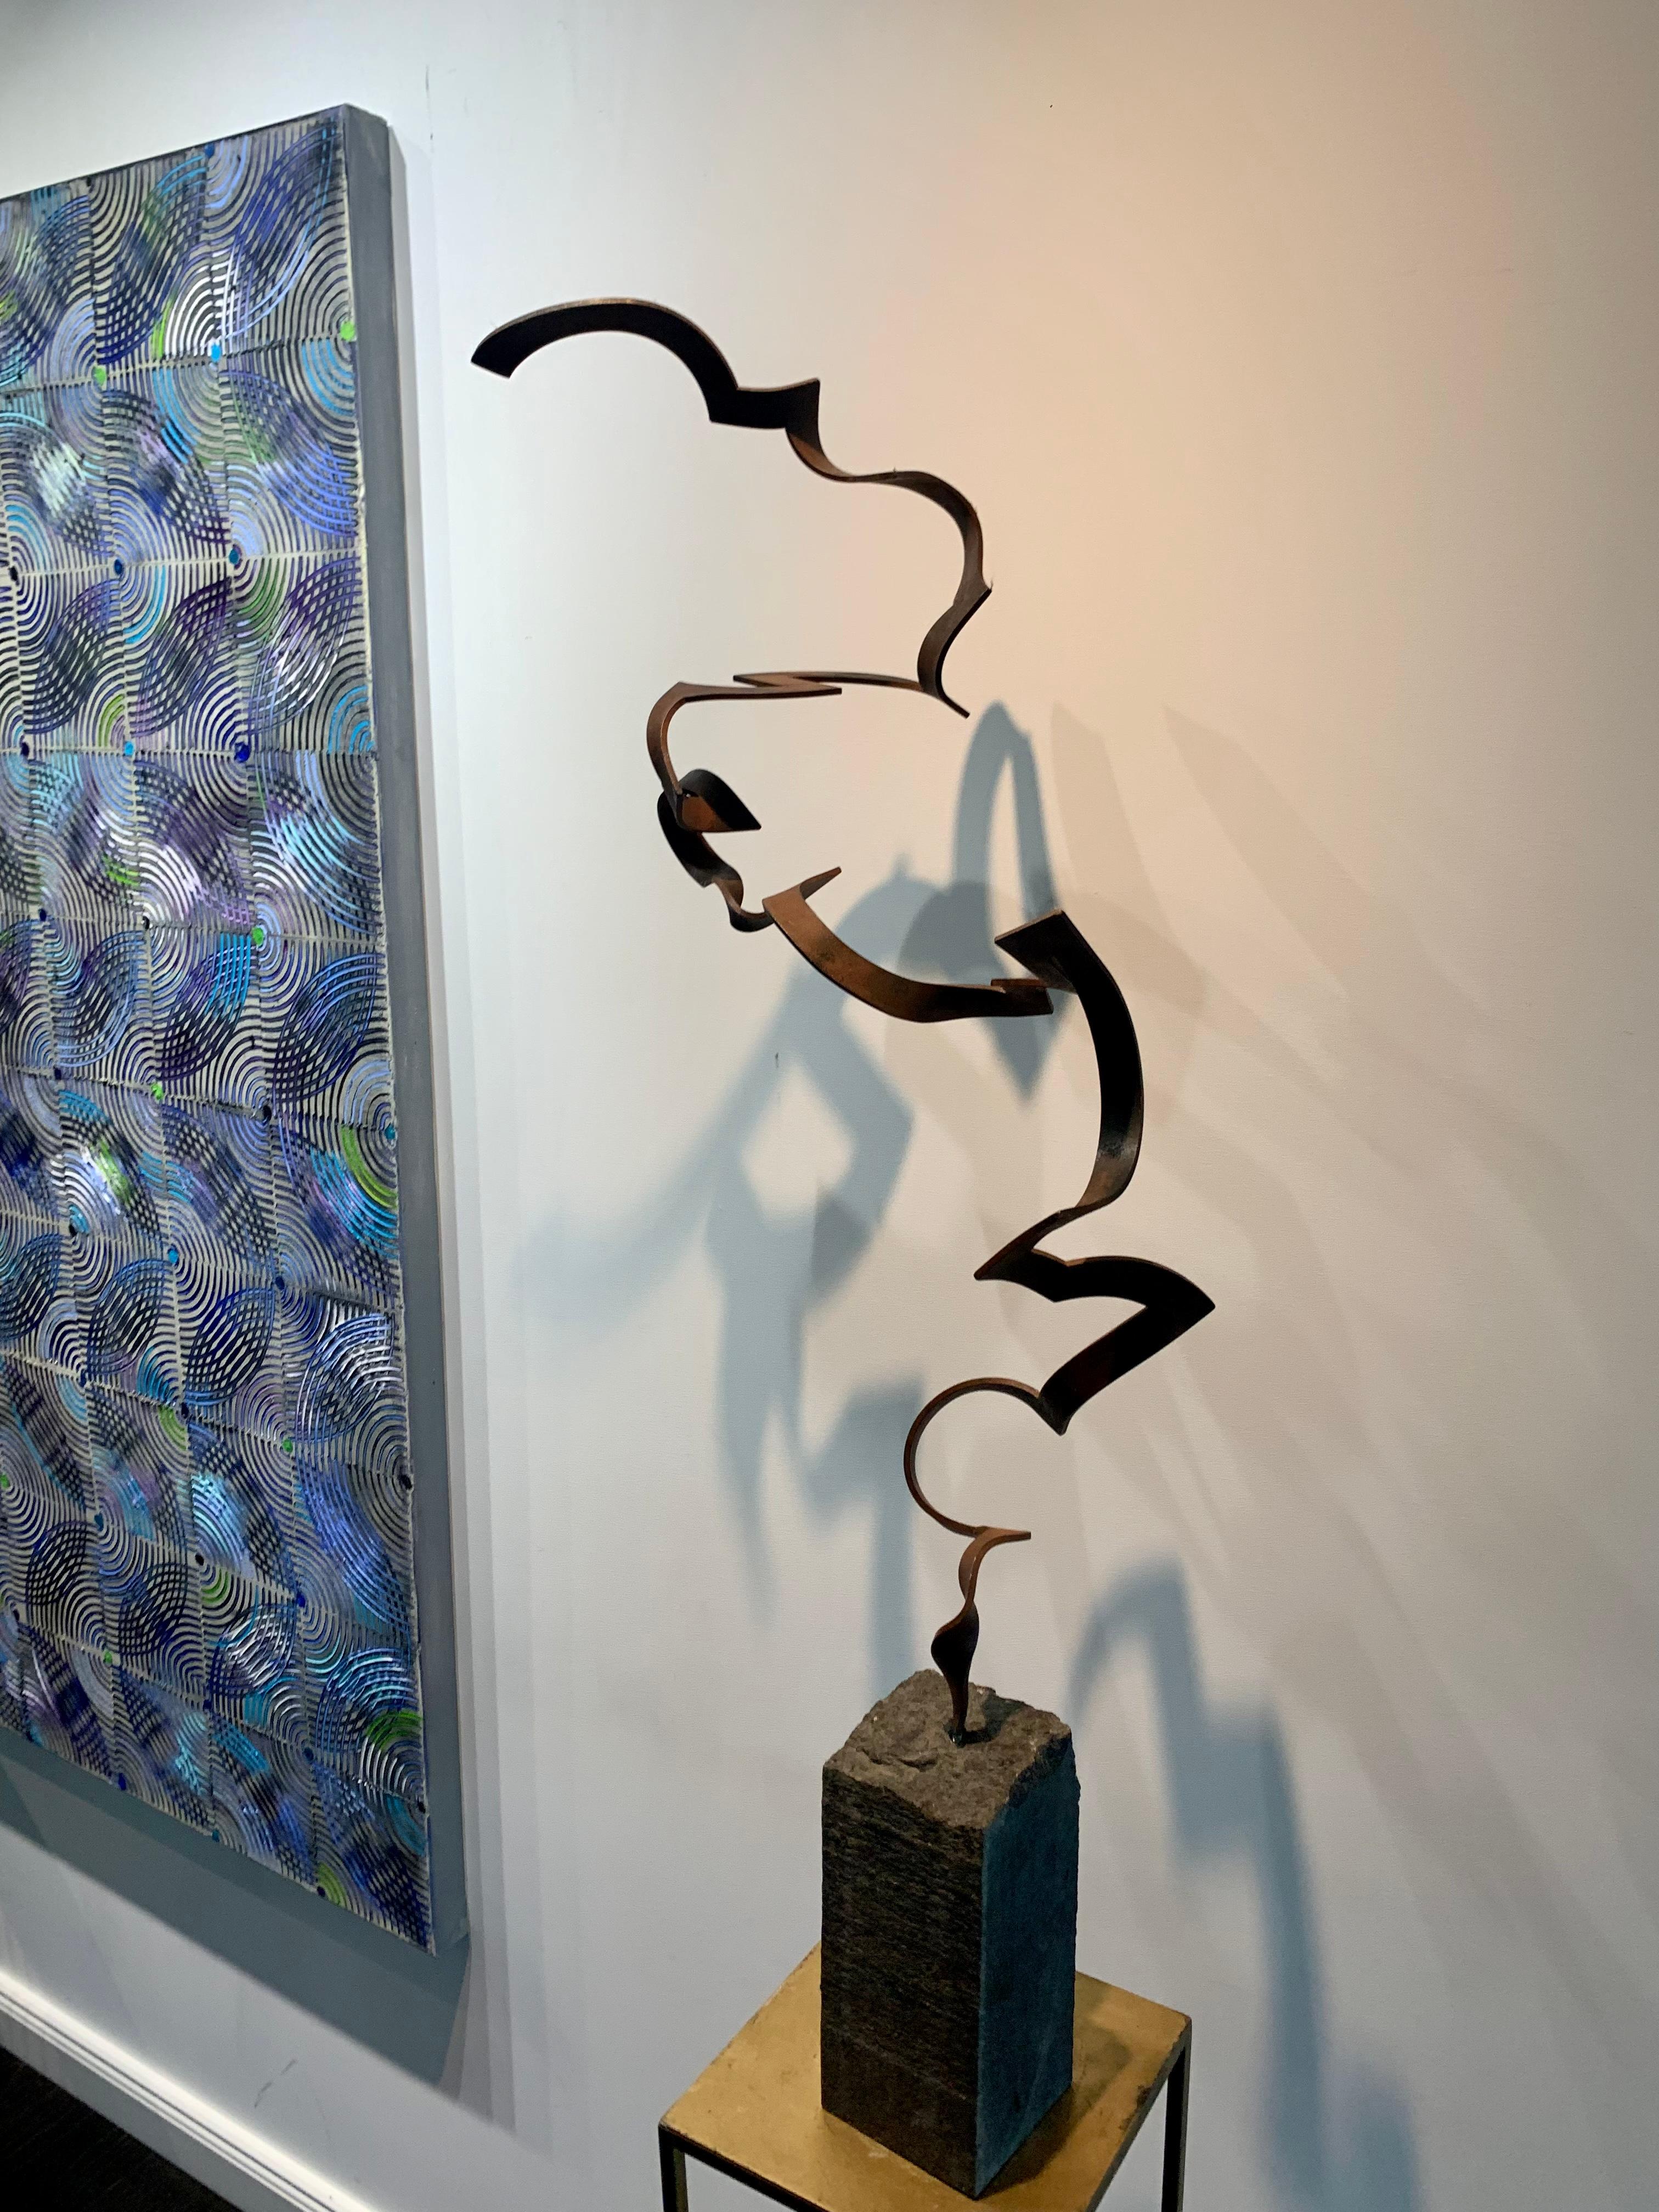 This beautiful large corroded steel  sculpture can be used for indoor or outdoors. It makes for an elegant statement in any garden, lobby or private home.

Artist: Kuno Vollet
Size: 100 x 30x 25